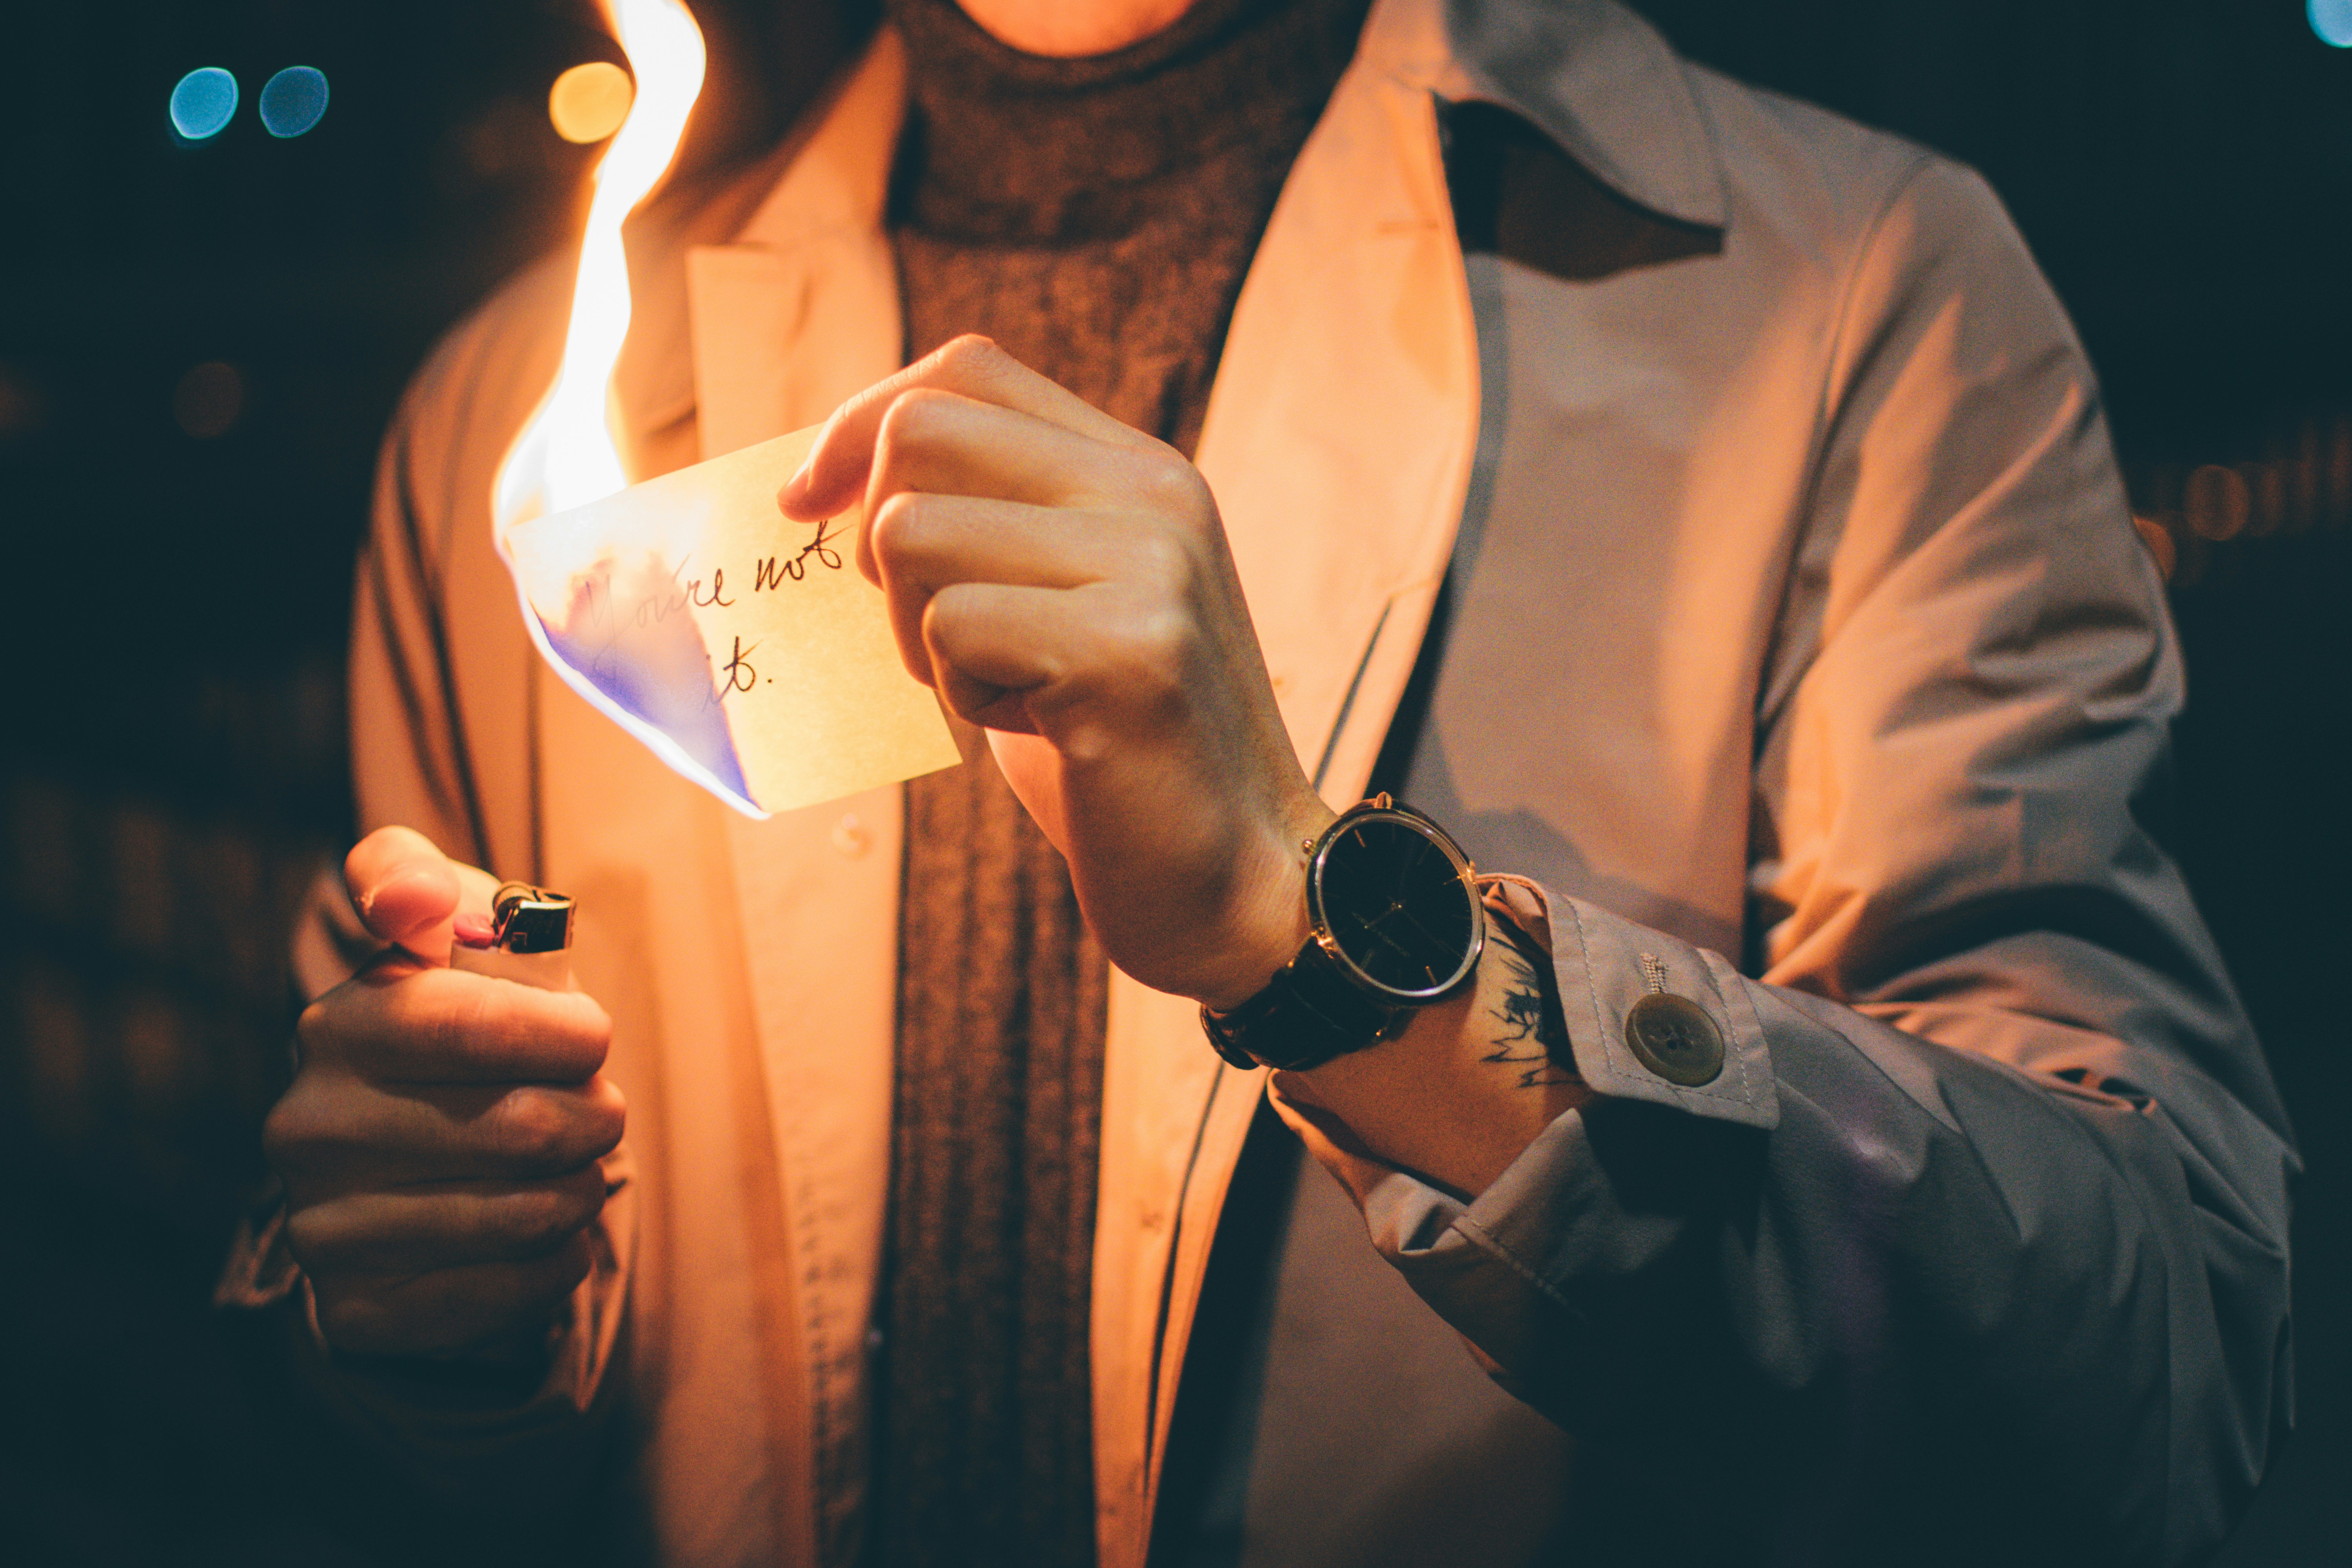 low light photography of person holding paper with flame